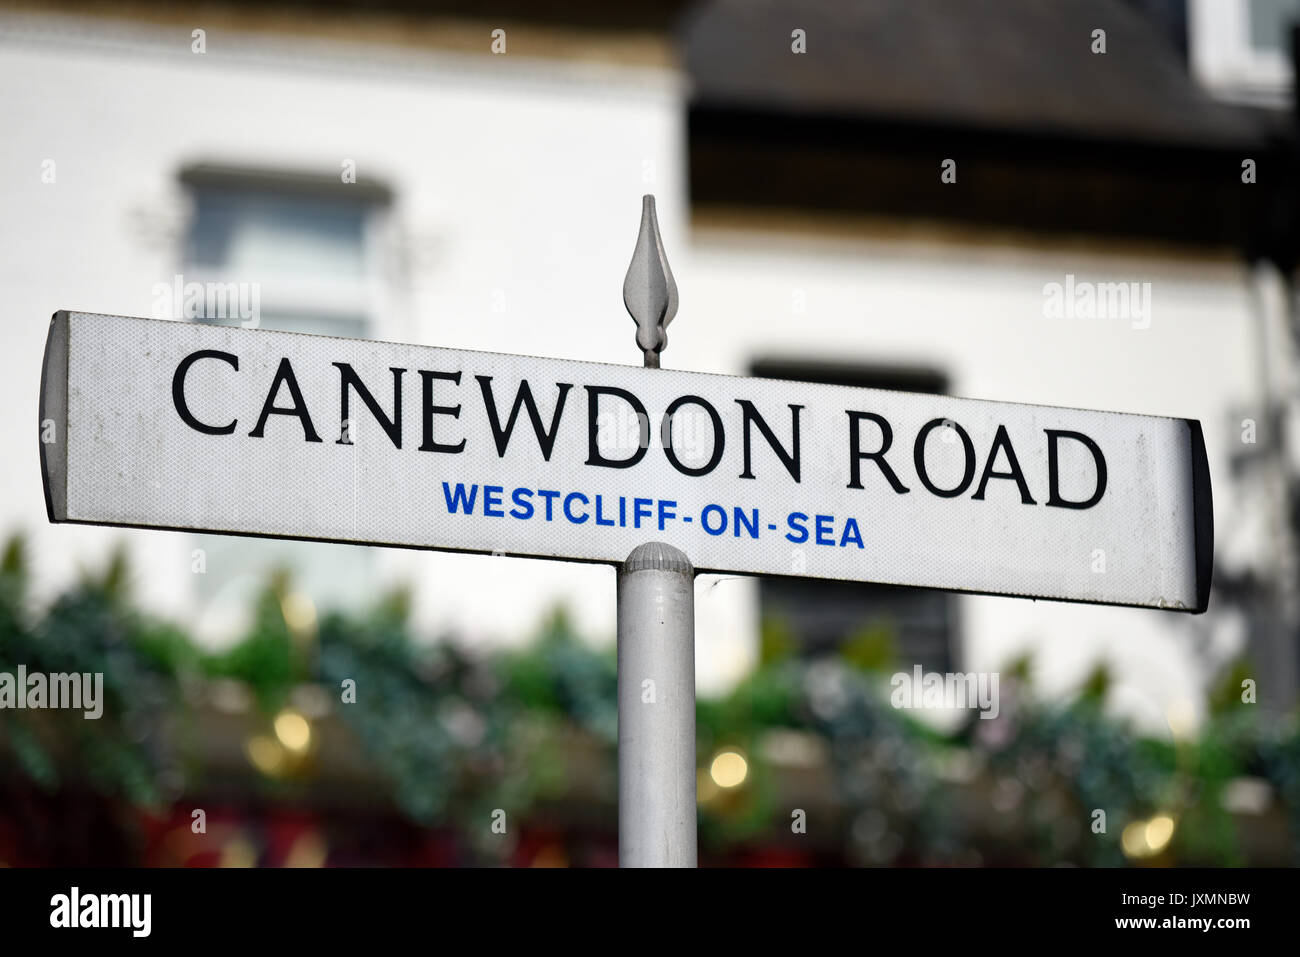 Canewdon Road street sign in Westcliff on Sea, Essex, UK Stock Photo